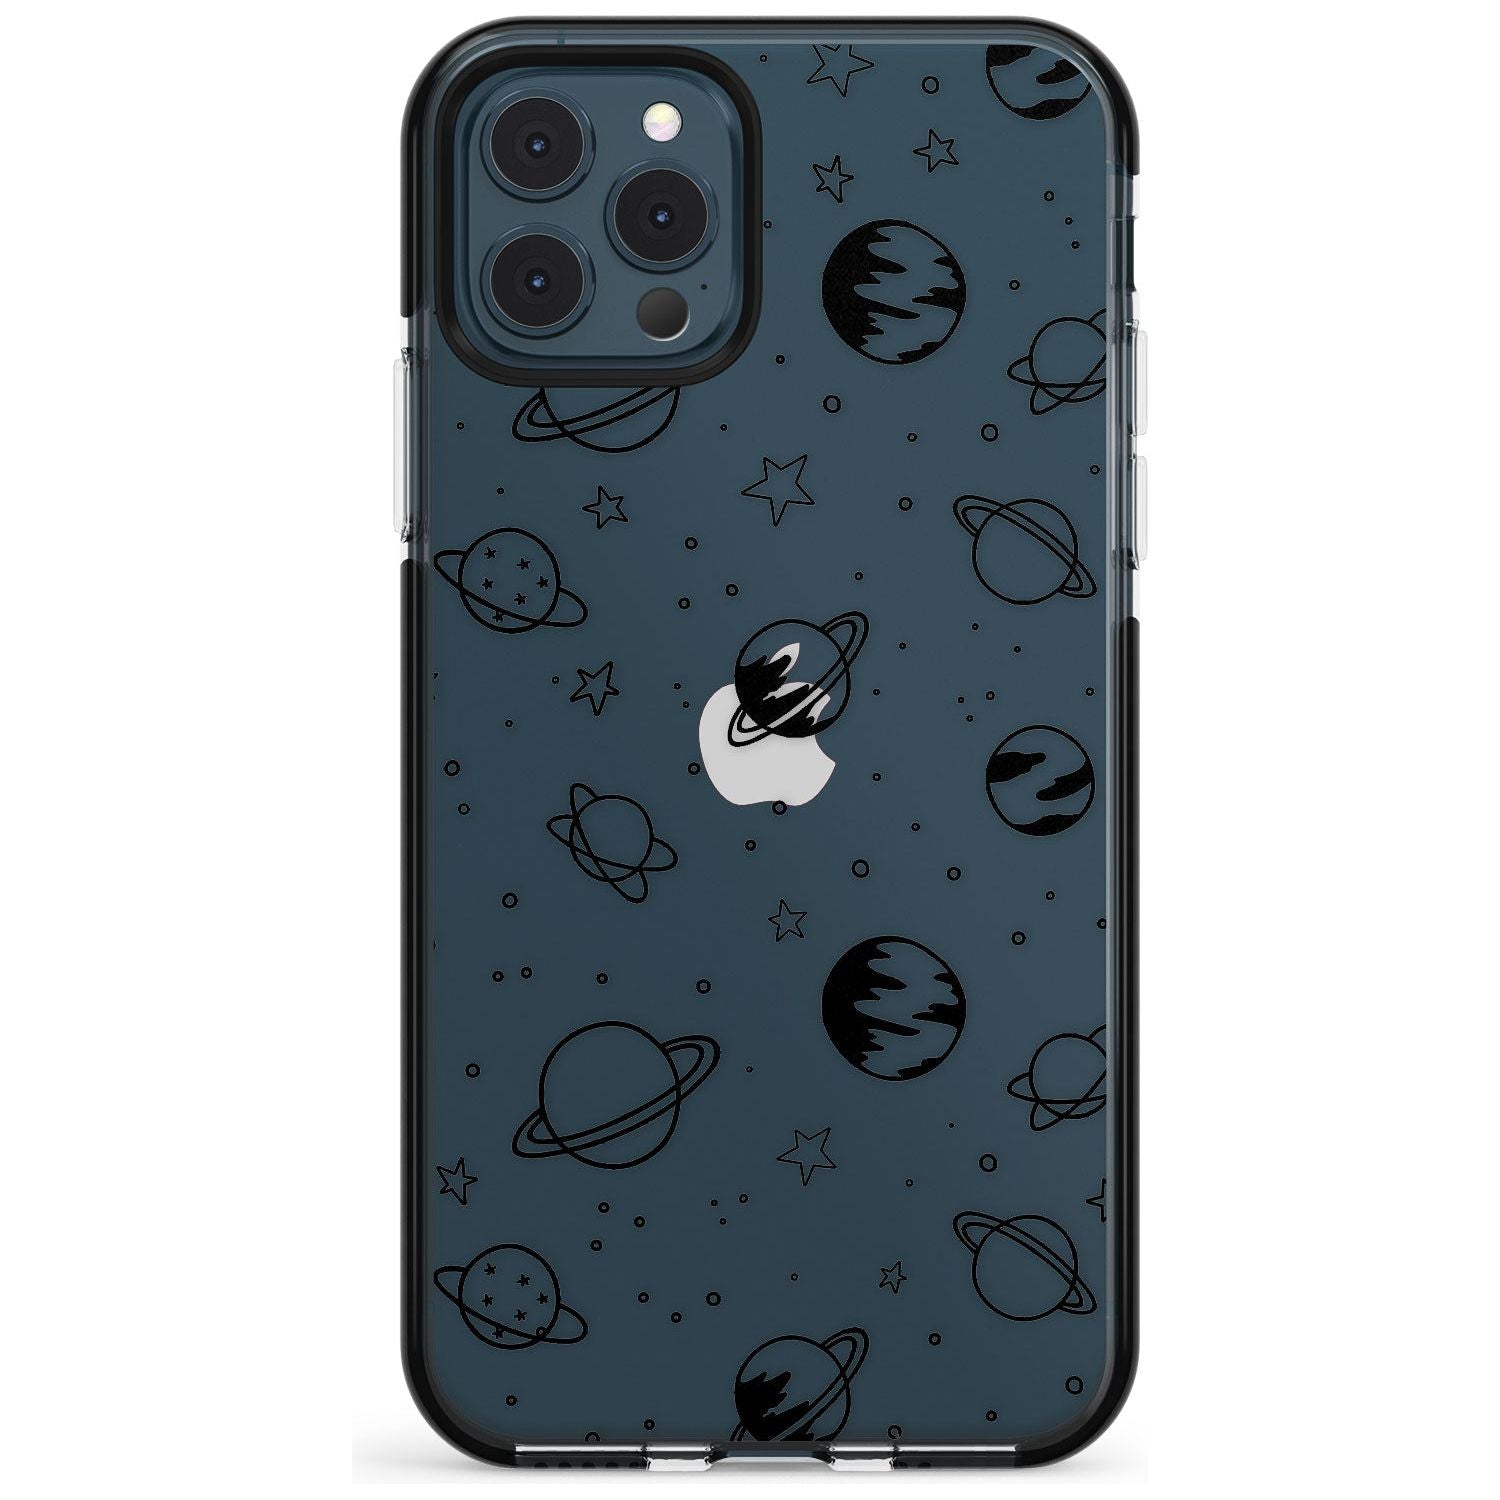 Outer Space Outlines: Black on Clear Pink Fade Impact Phone Case for iPhone 11